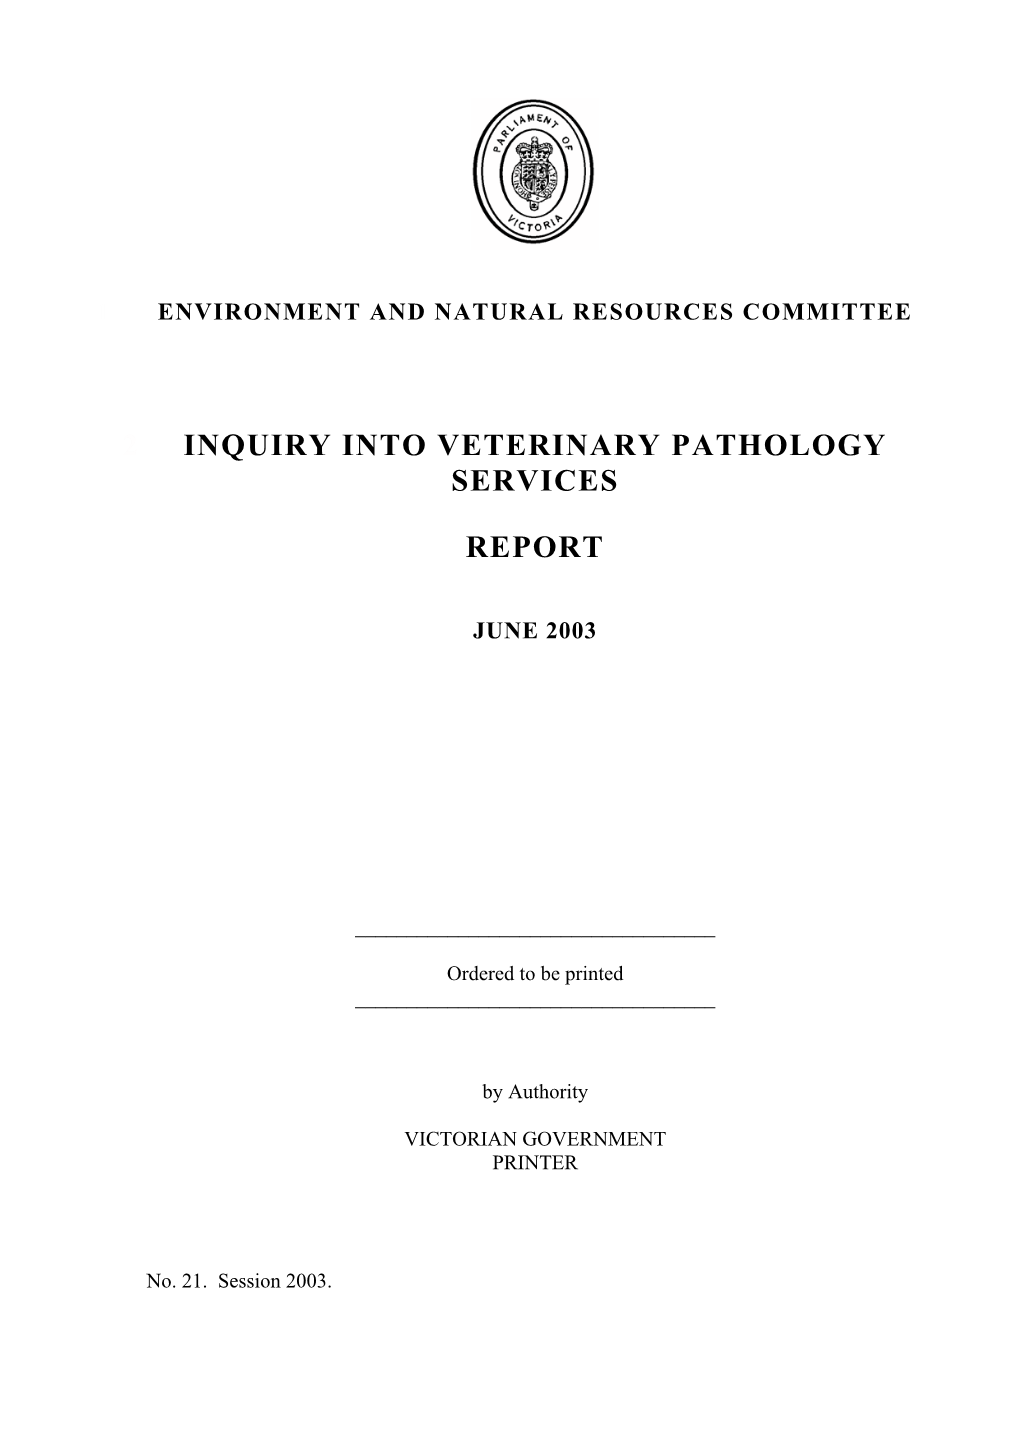 2 Inquiry Into Veterinary Pathology Services Report